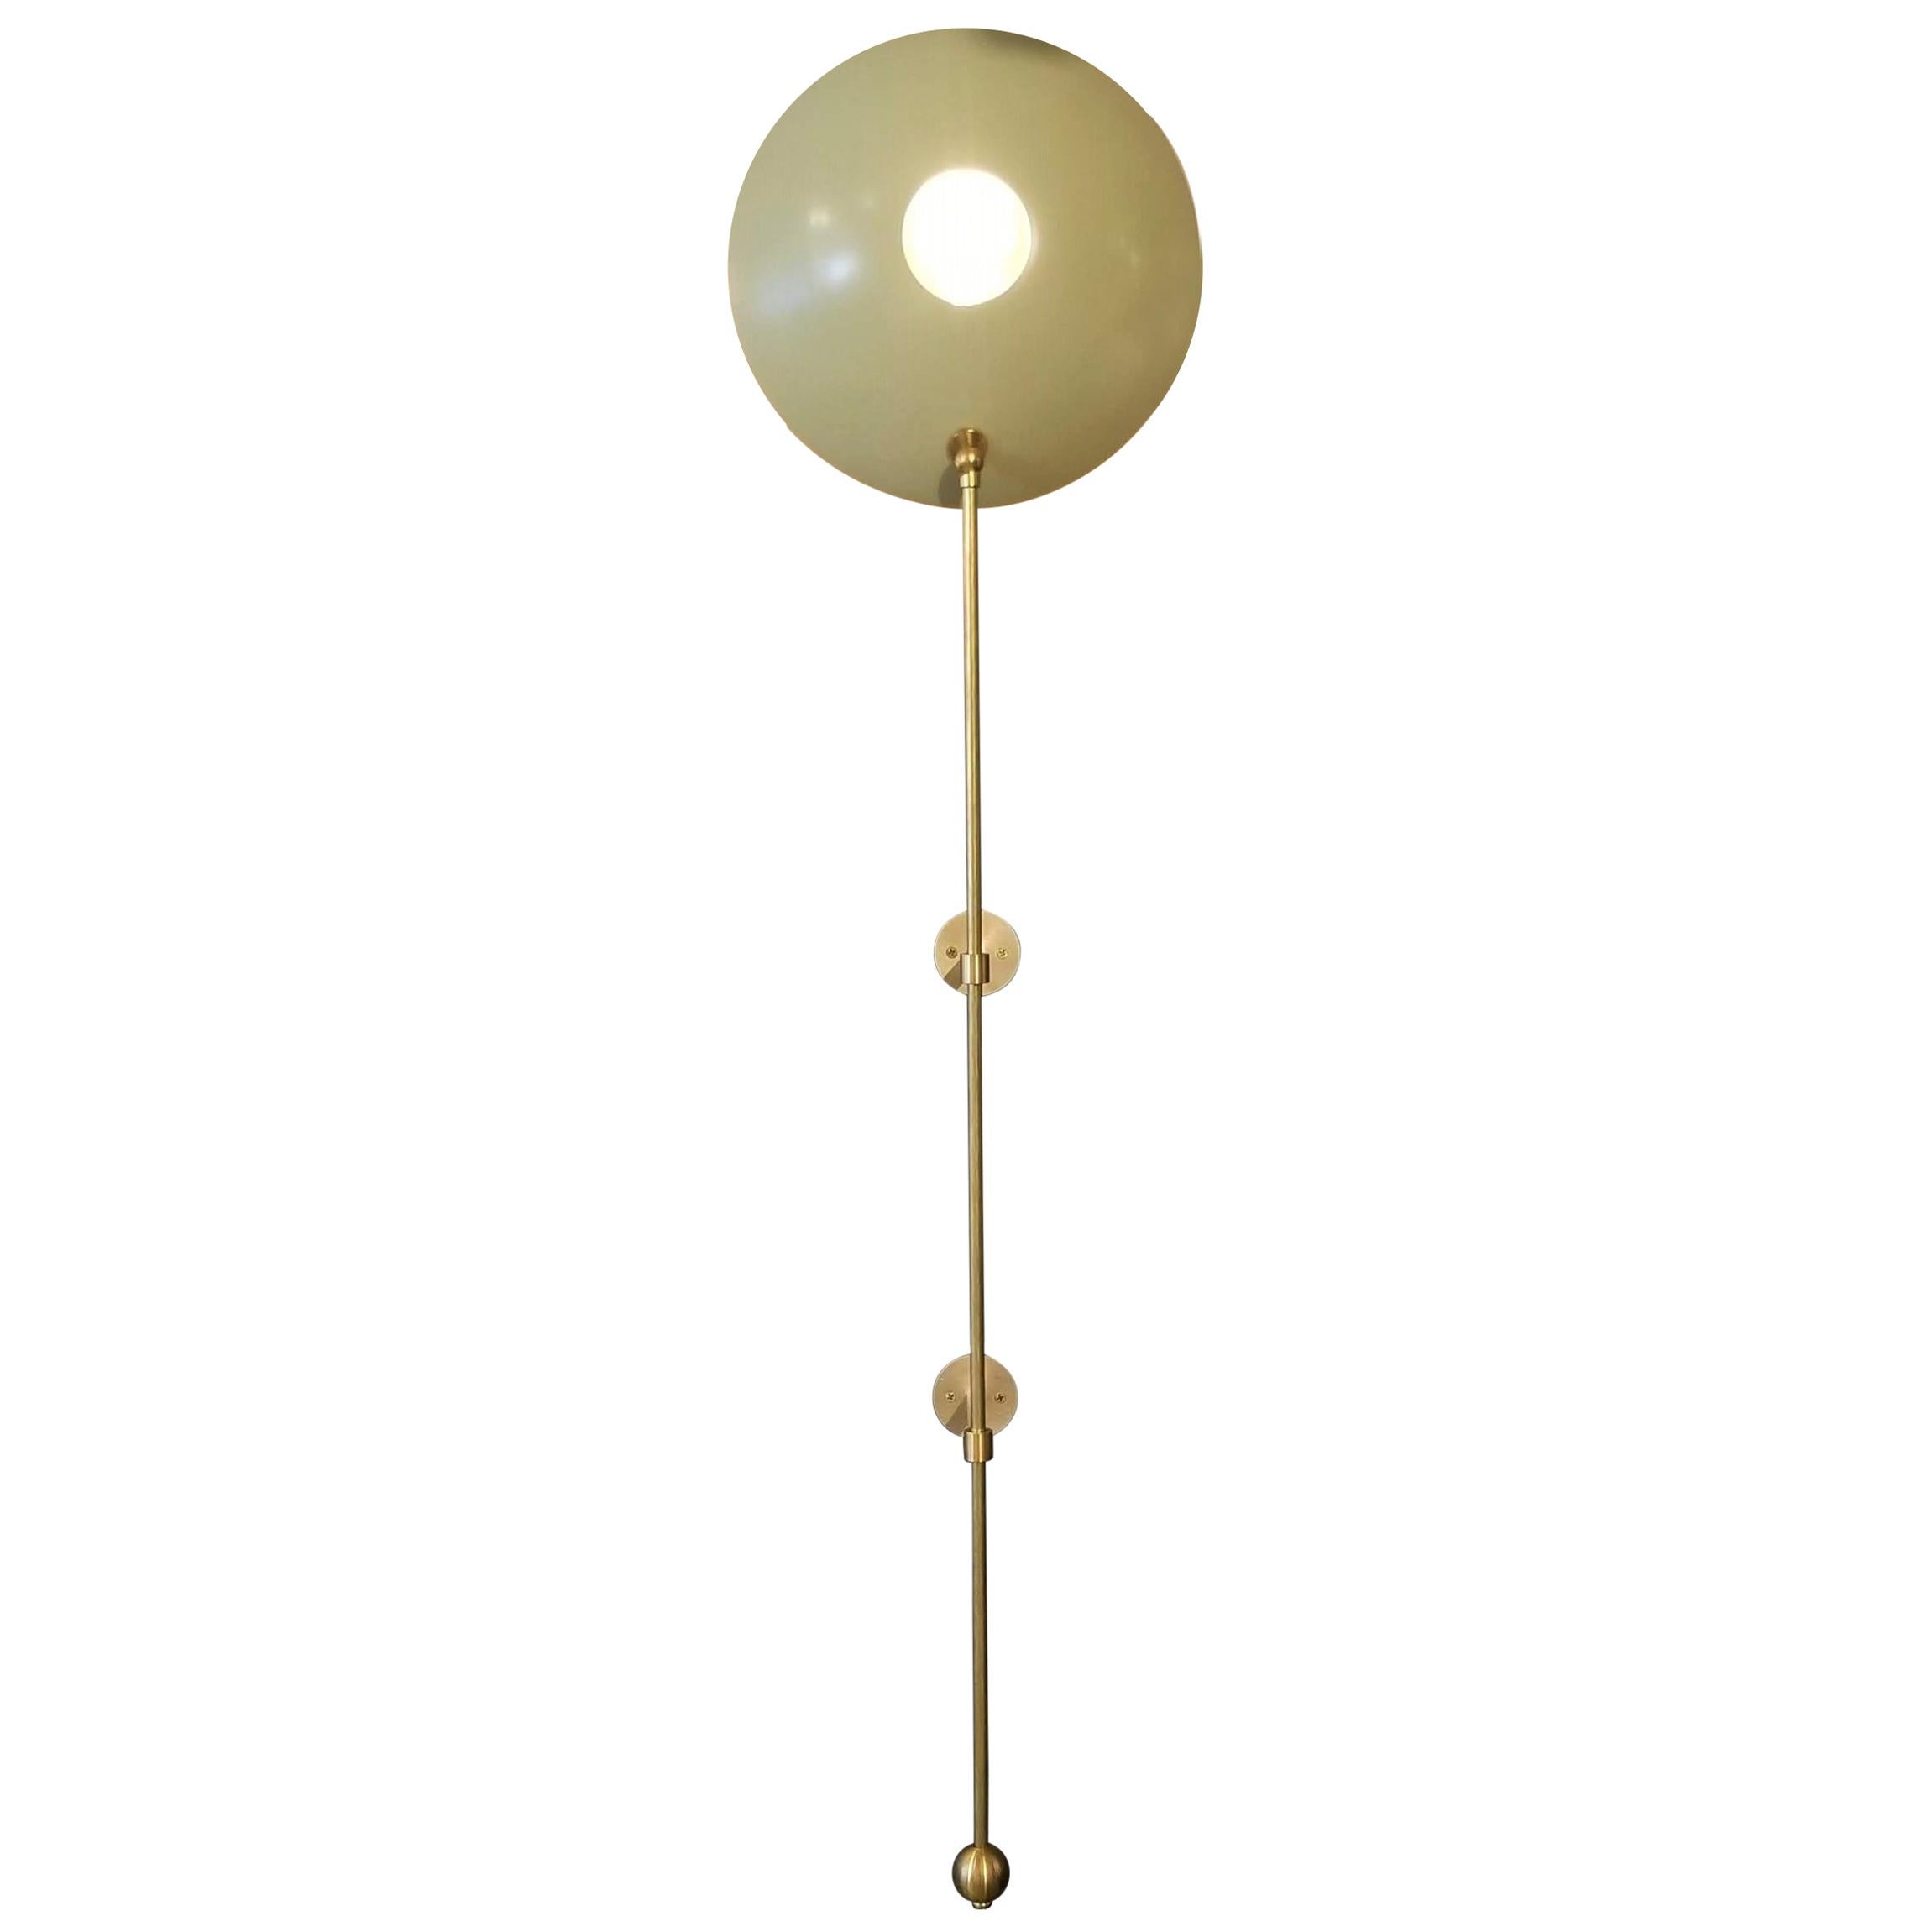 Large "POP" Wall Sconce in Brass and Light Green Enamel by Blueprint Lighting